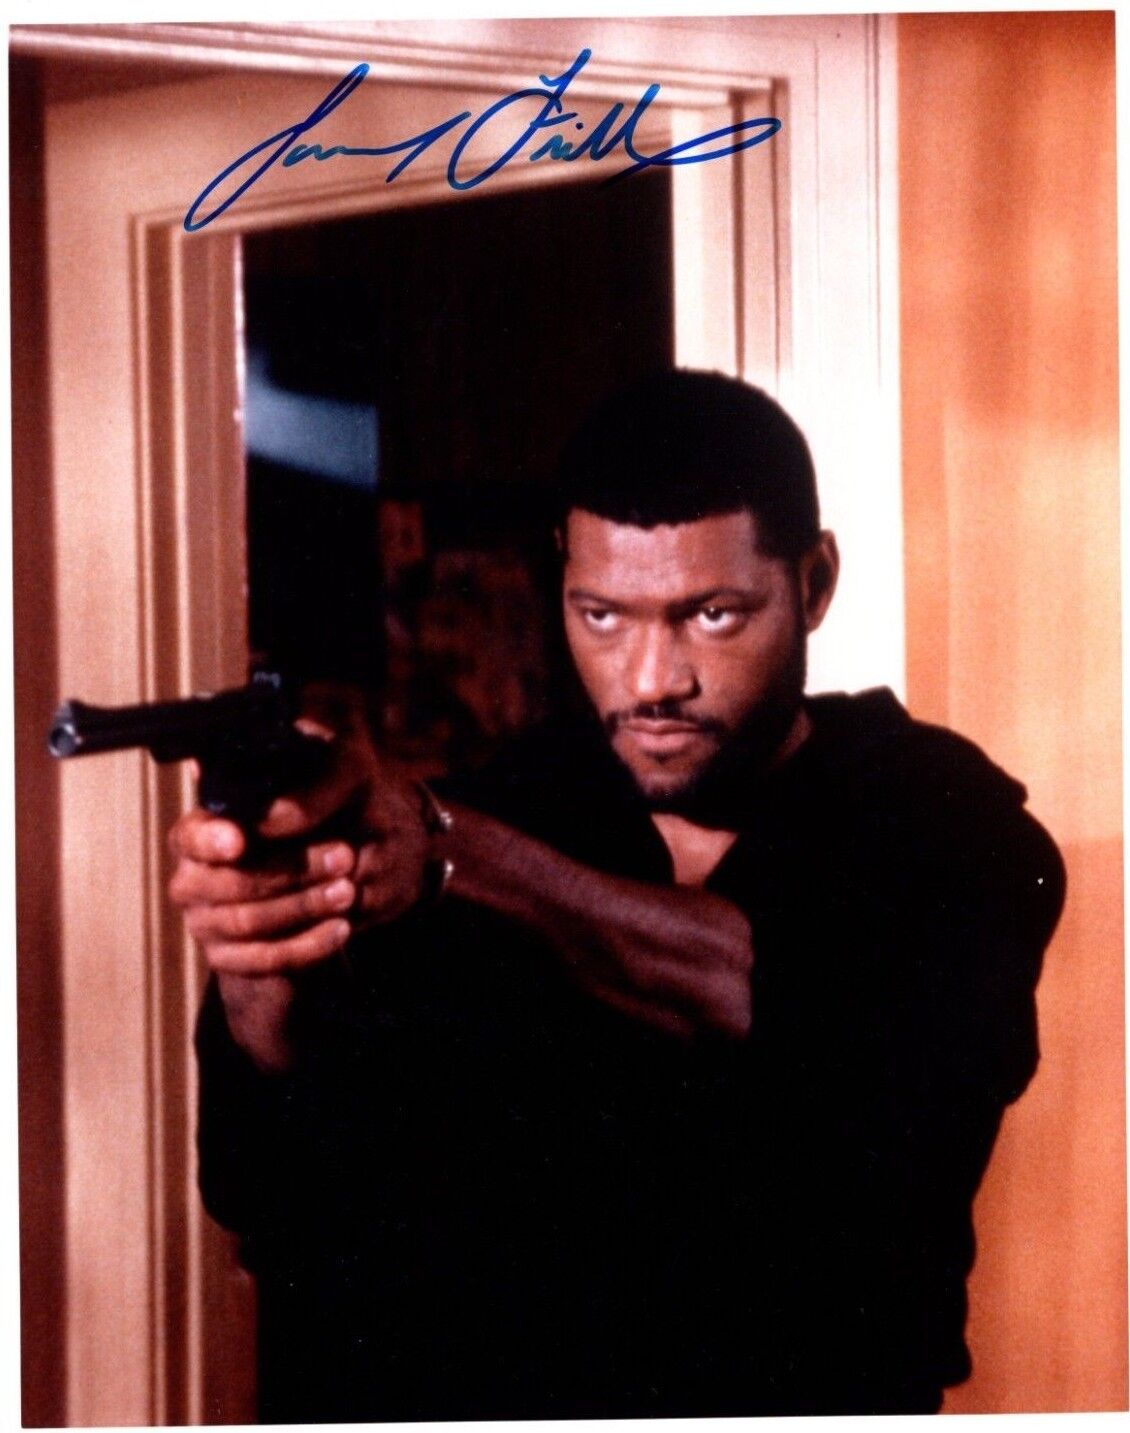 Laurence Fishburne Actor Movie Star Hand Signed Autograph 8x10 Photo Poster painting